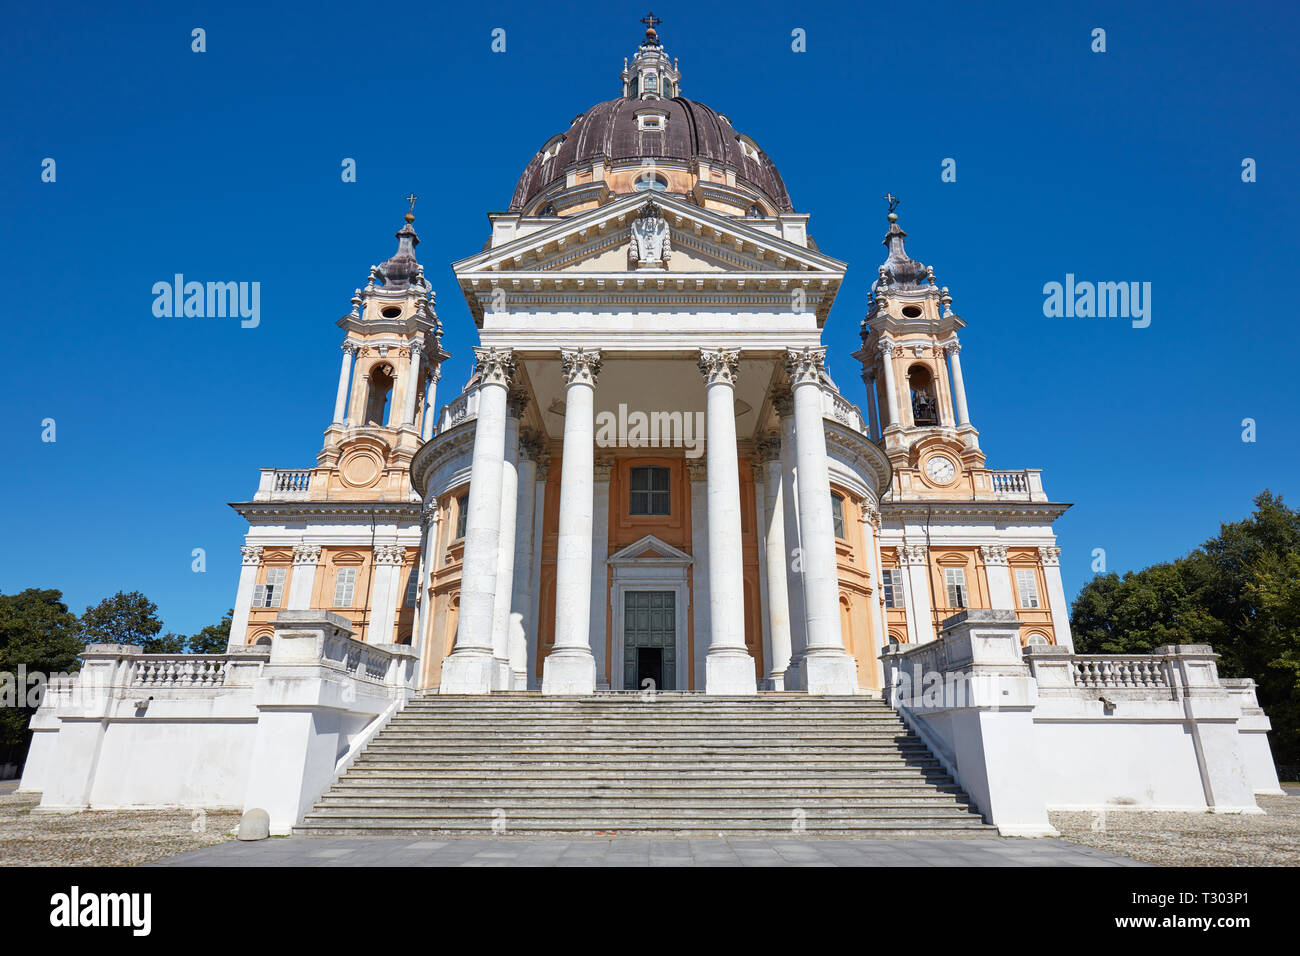 Superga basilica in Turin frontal view, nobody in a sunny summer day in Italy Stock Photo